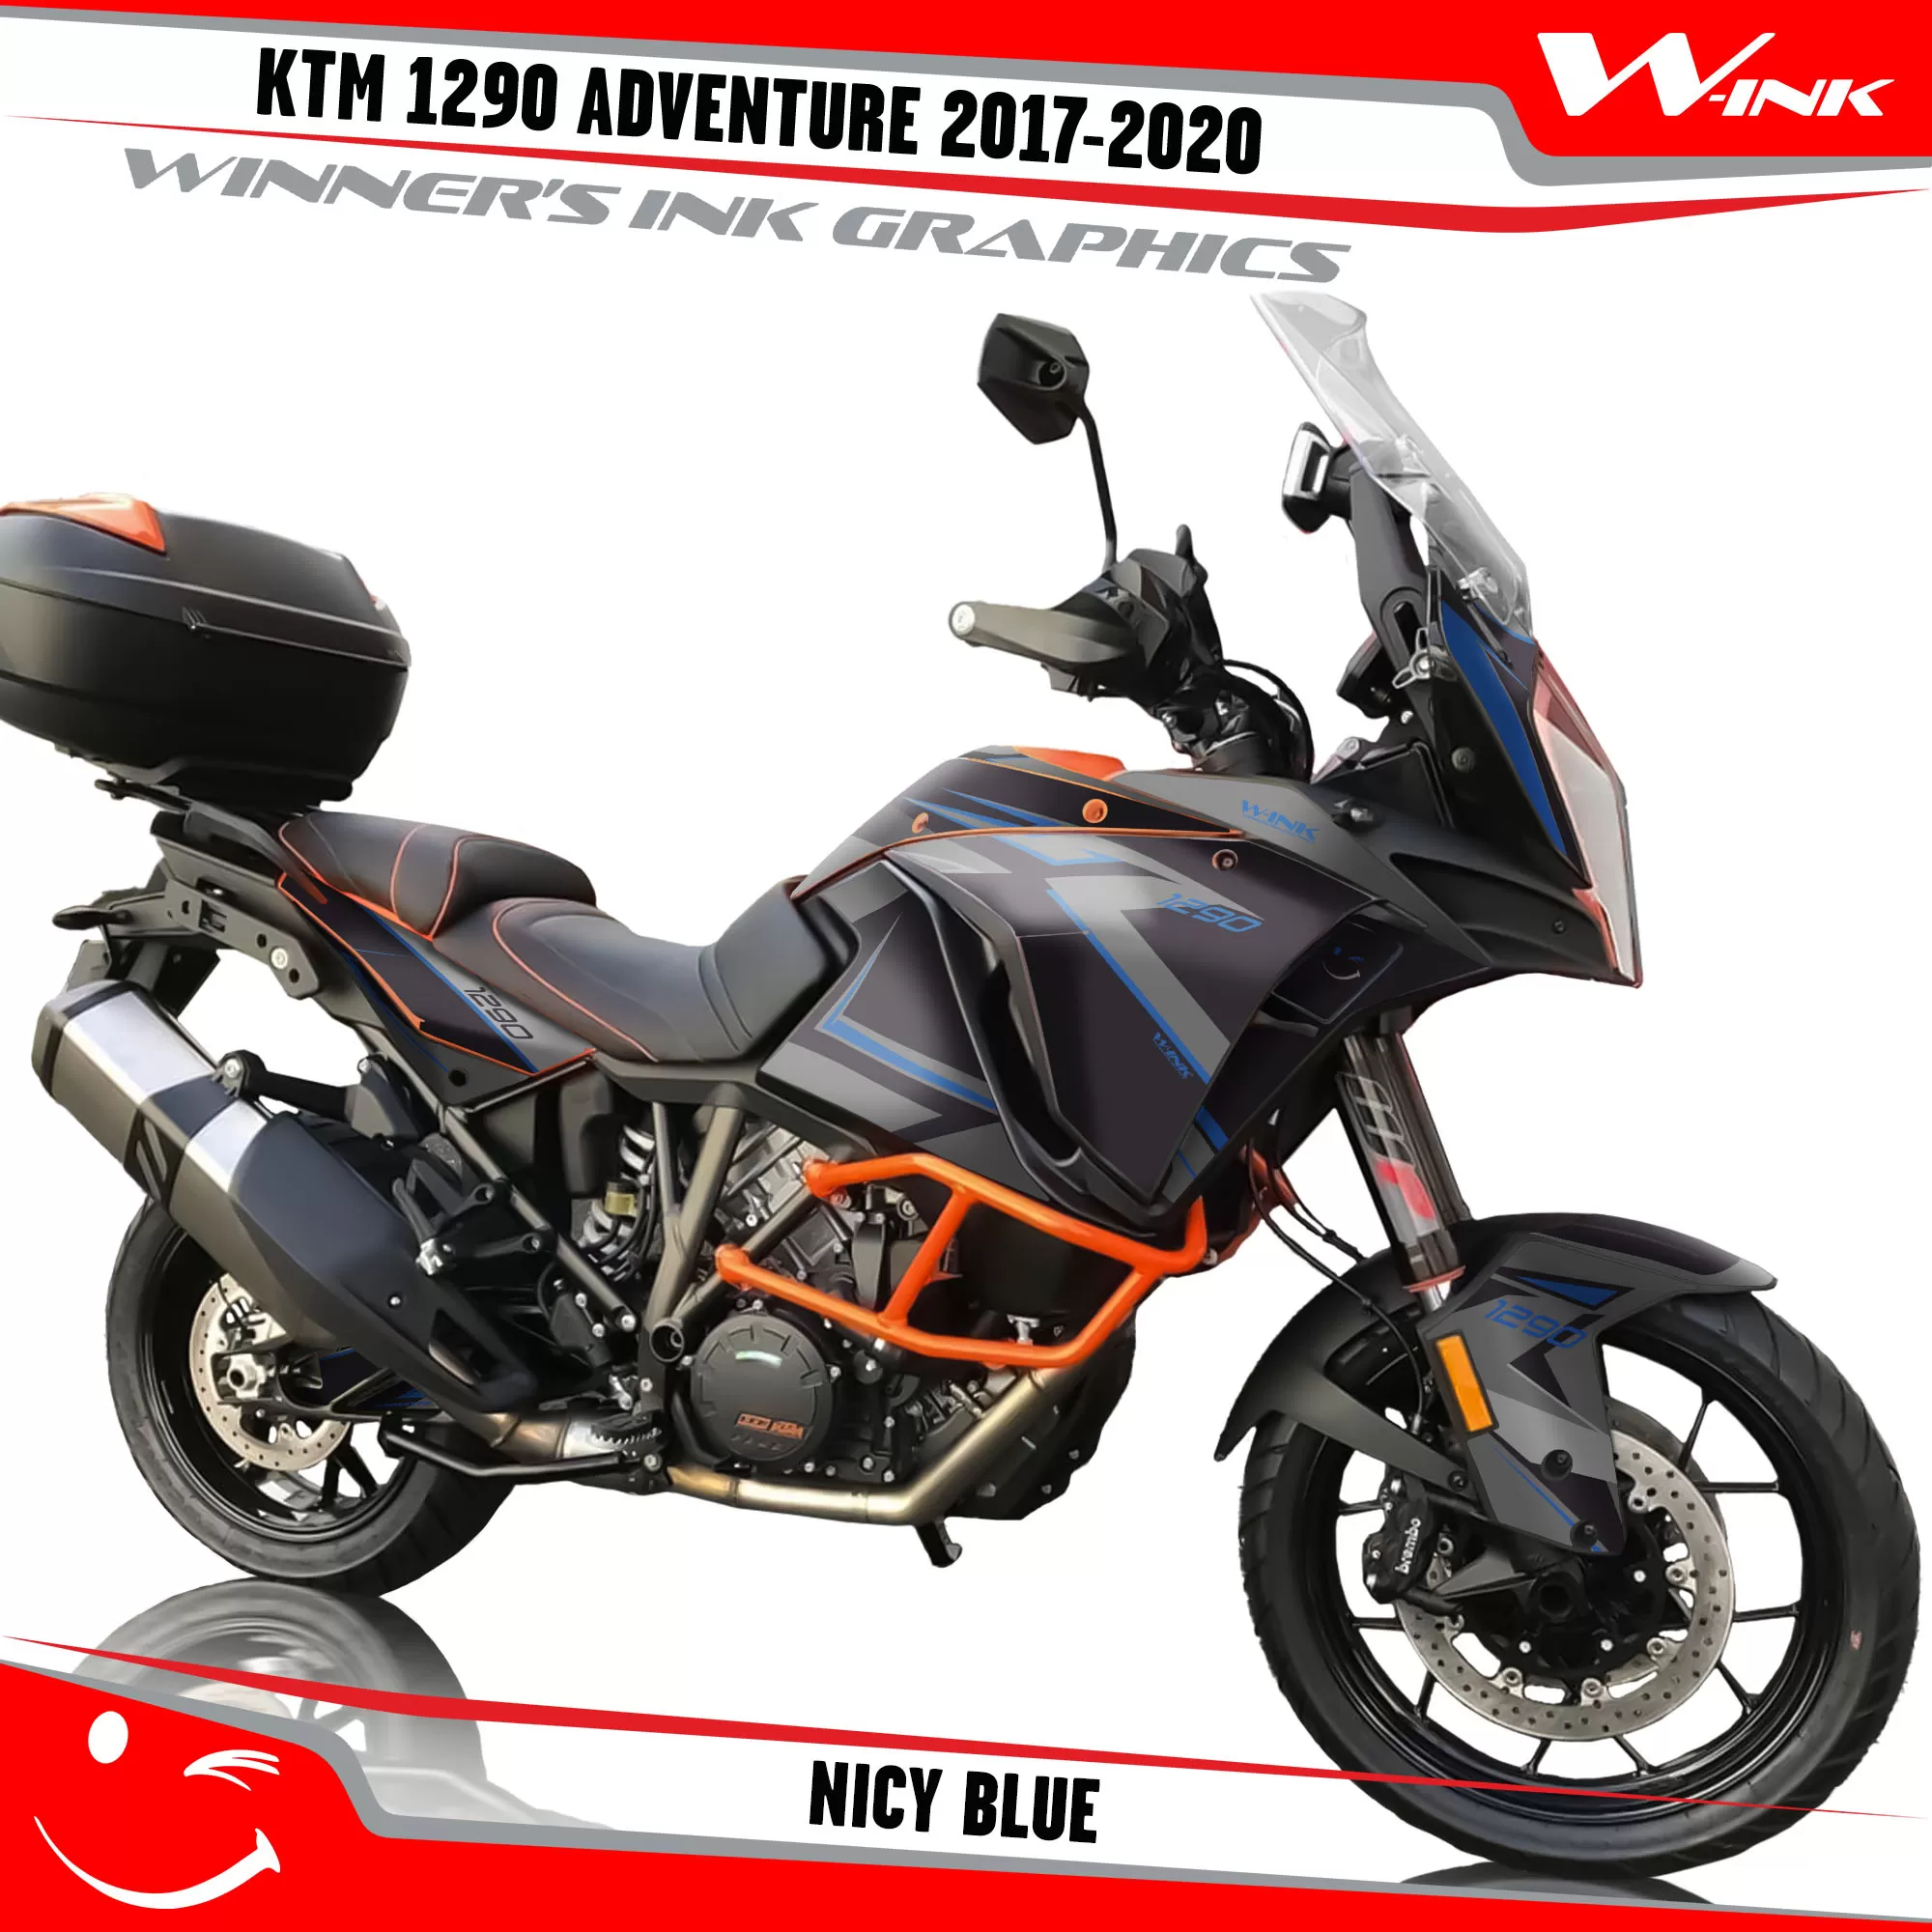 KTM-Adventure-1290-2017-2018-2019-2020-graphics-kit-and-decals-Nicy-Blue